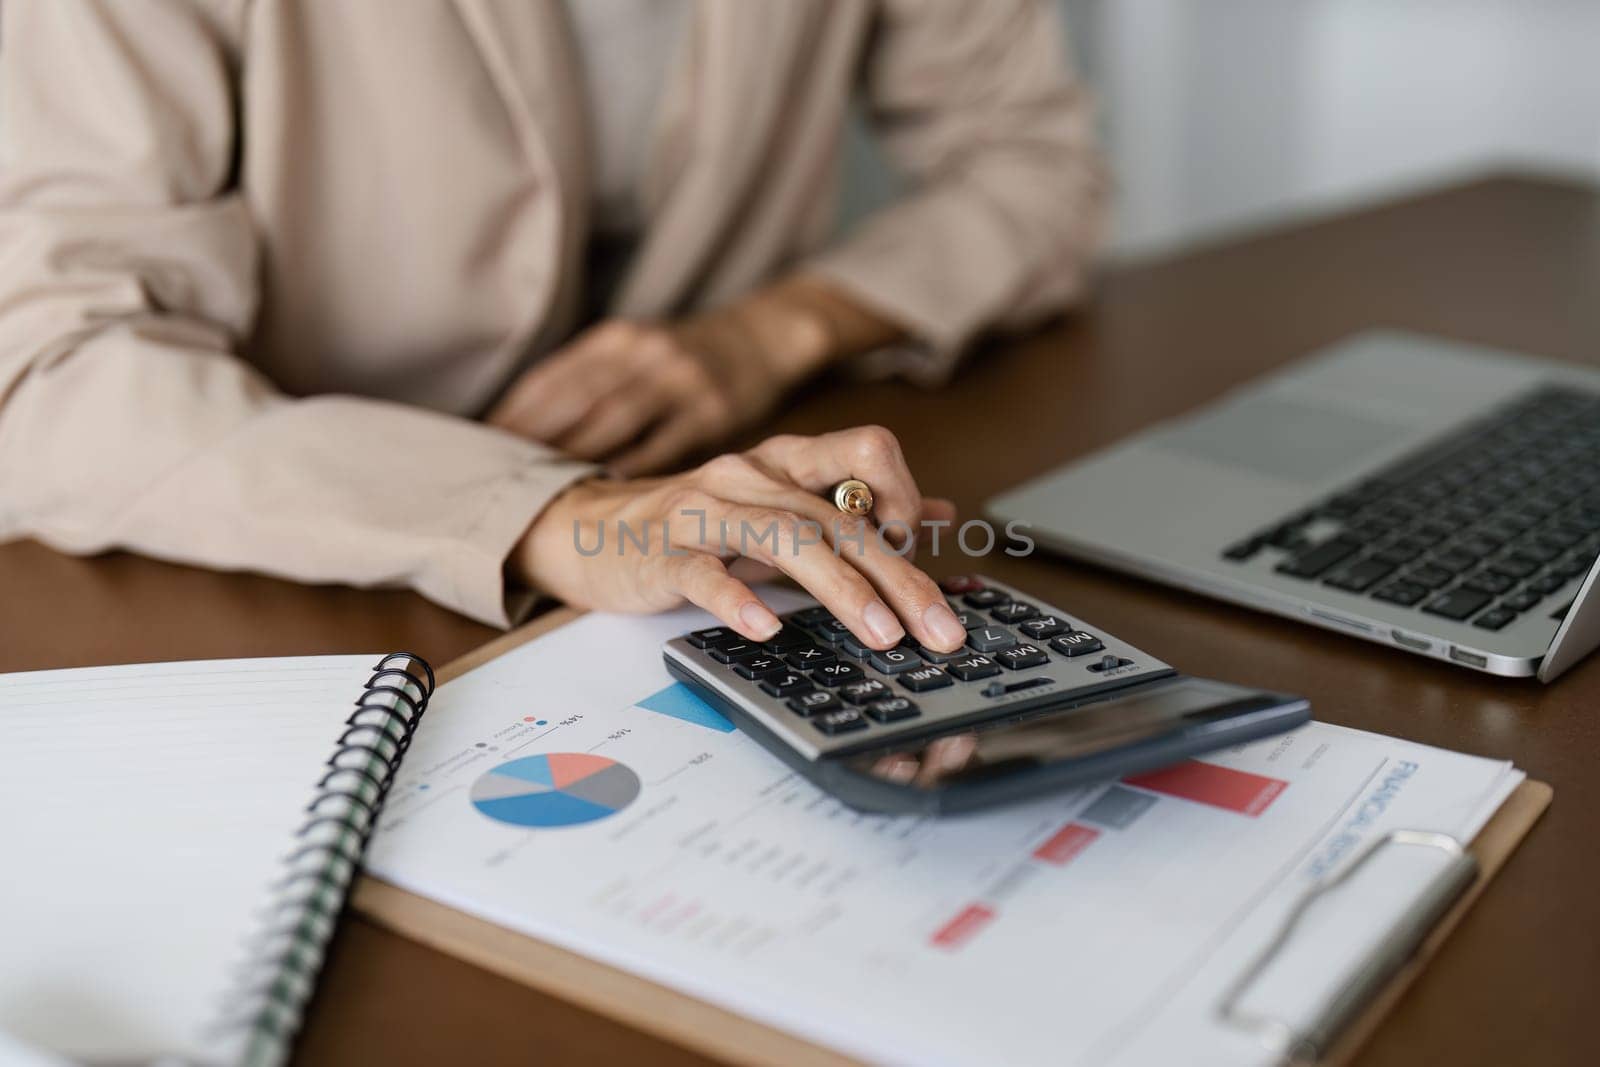 Businesswoman using a calculator to calculate numbers on a company's financial documents, she is analyzing historical financial data to plan how to grow the company. Financial concept by itchaznong